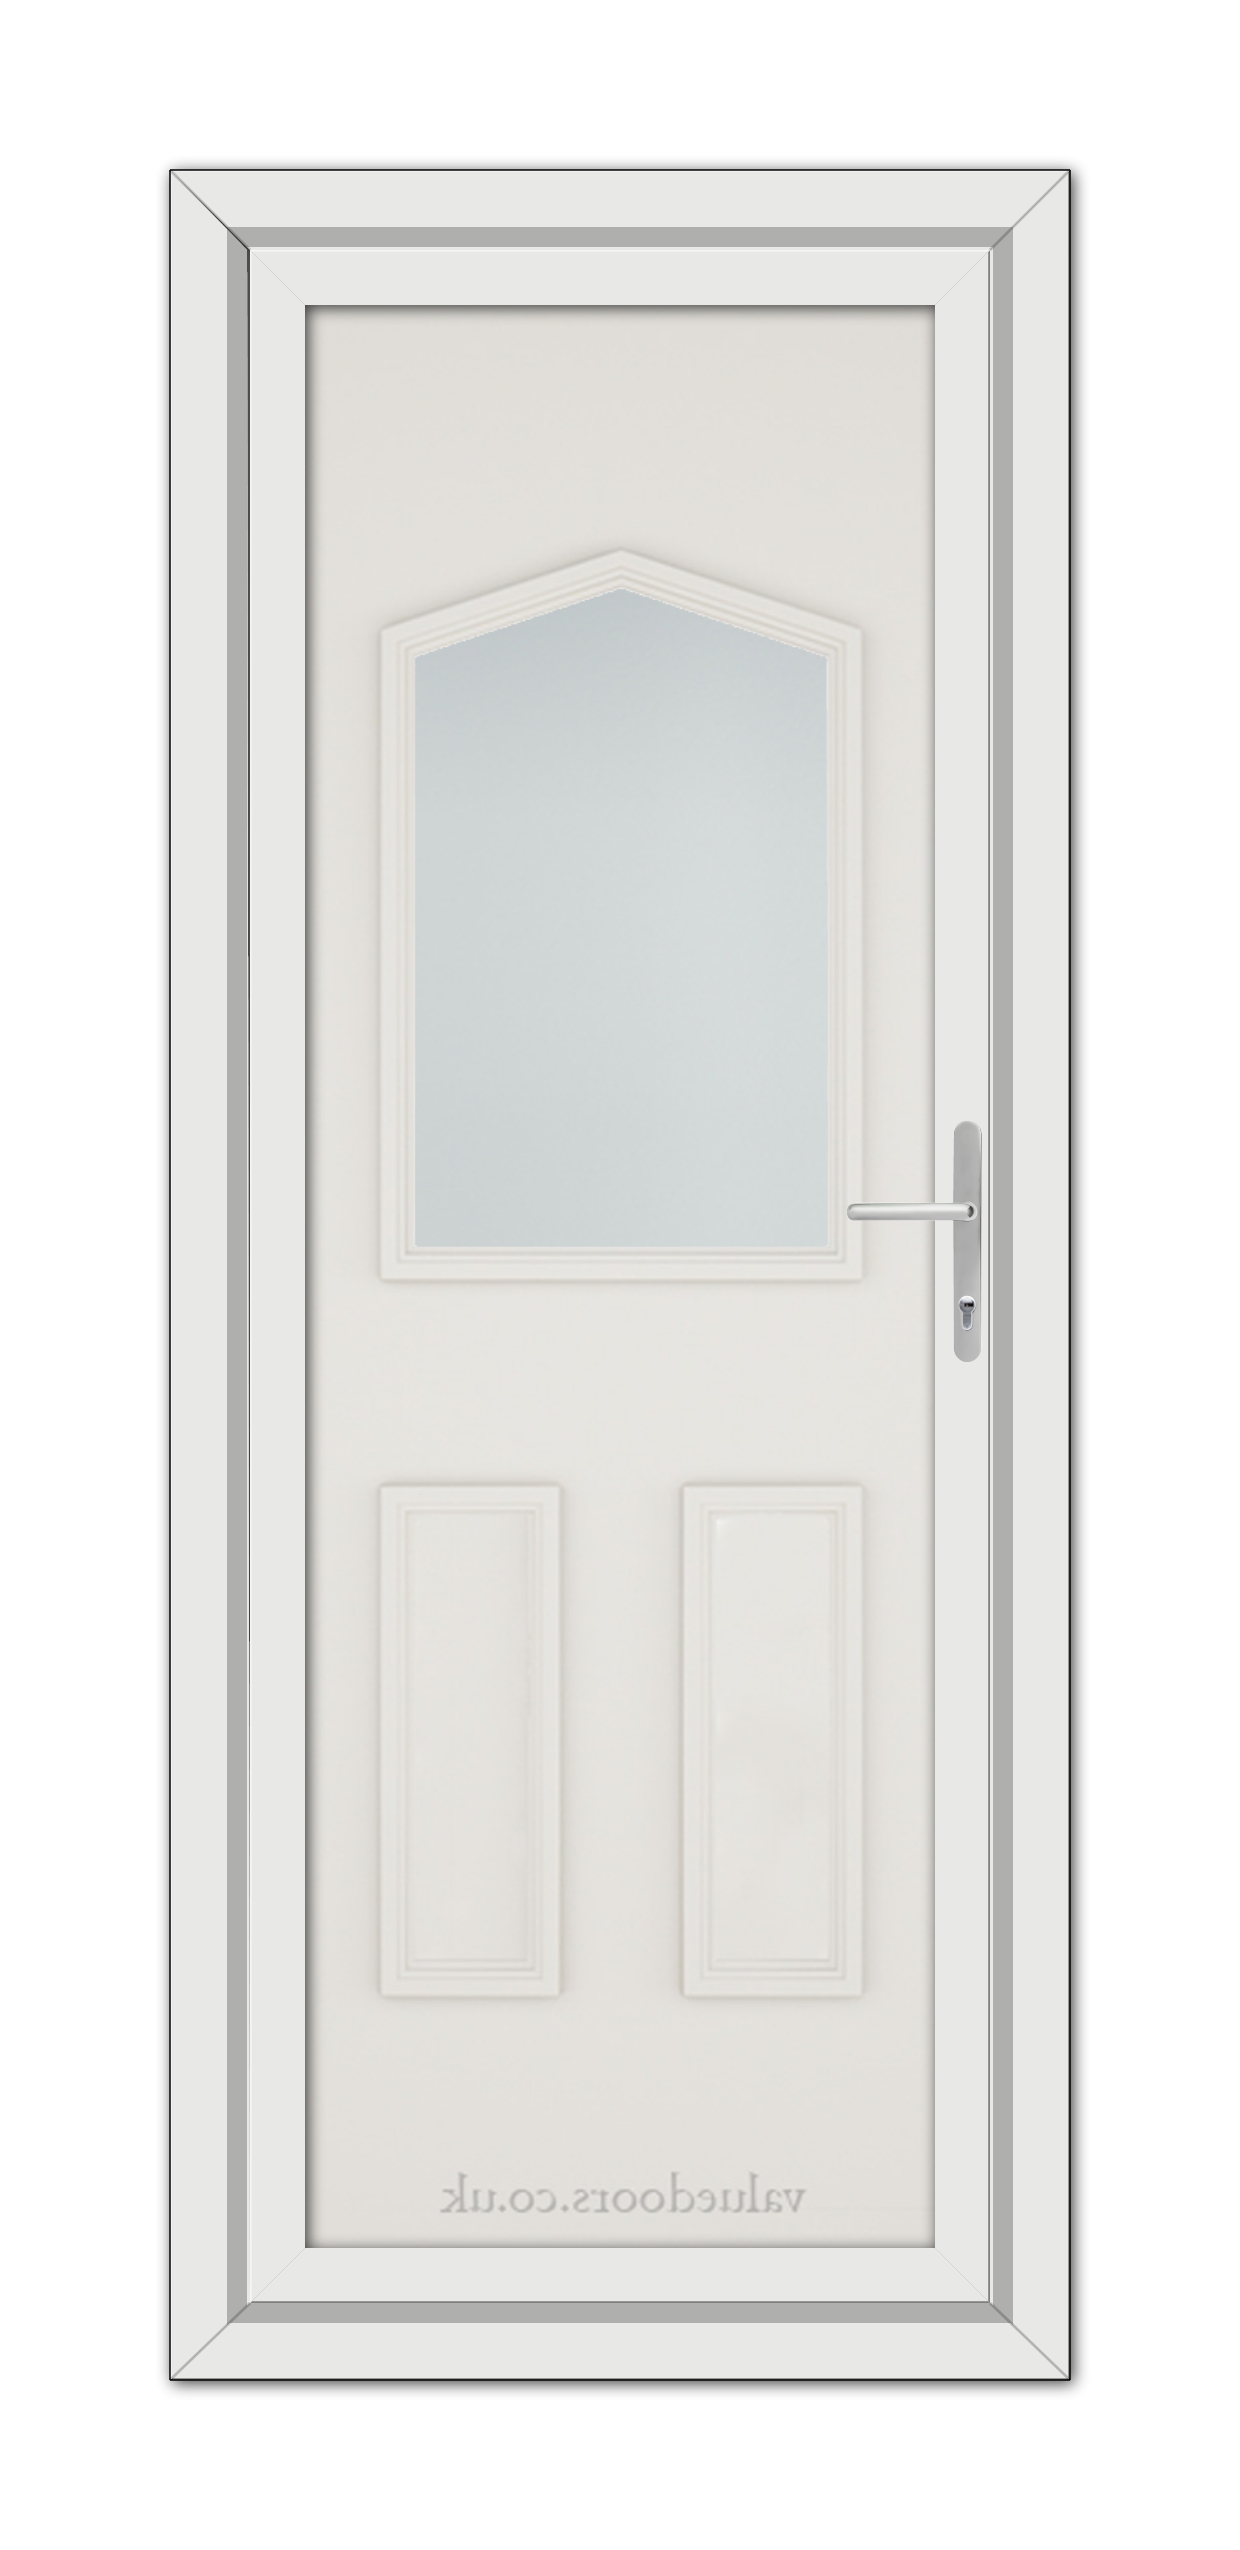 A vertical image of a White Cream Oxford uPVC Door with an arched glass window at the top and two recessed panels below, featuring a metallic handle on the right.